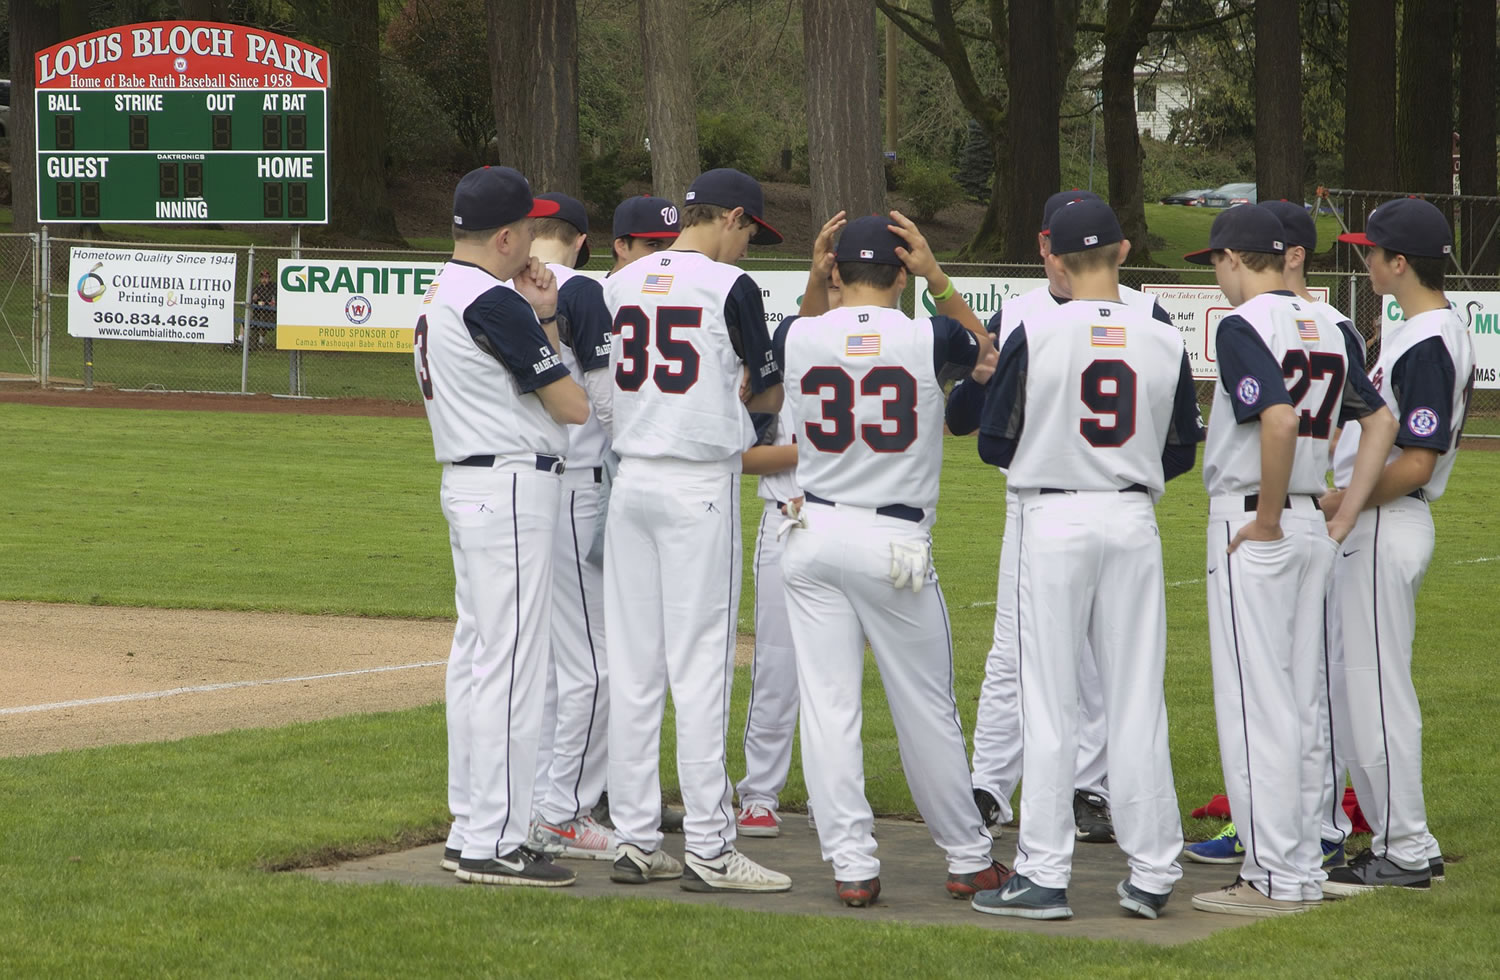 Players assemble before the home run derby starts at Louis Bloch Park in Camas on Saturday.